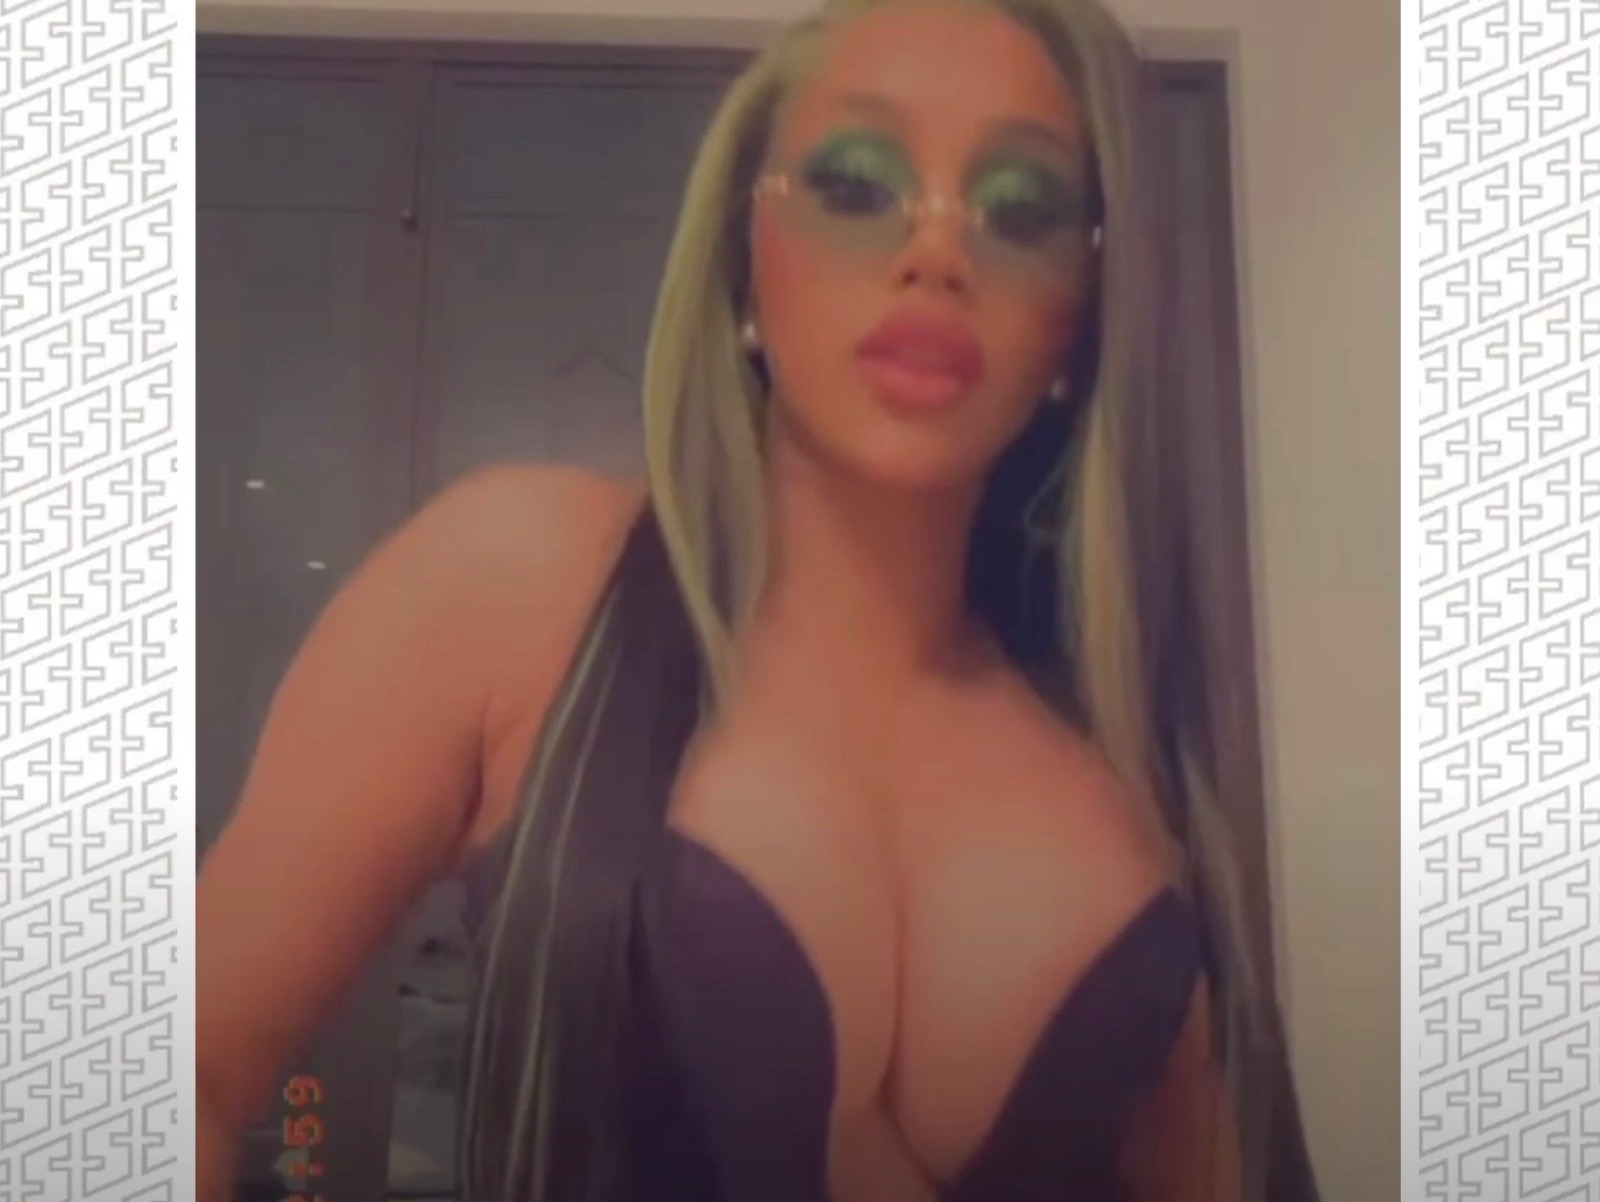 Cardi B Gets Bombed By Kulture Kiari While Trying To Make A Thirst Trap